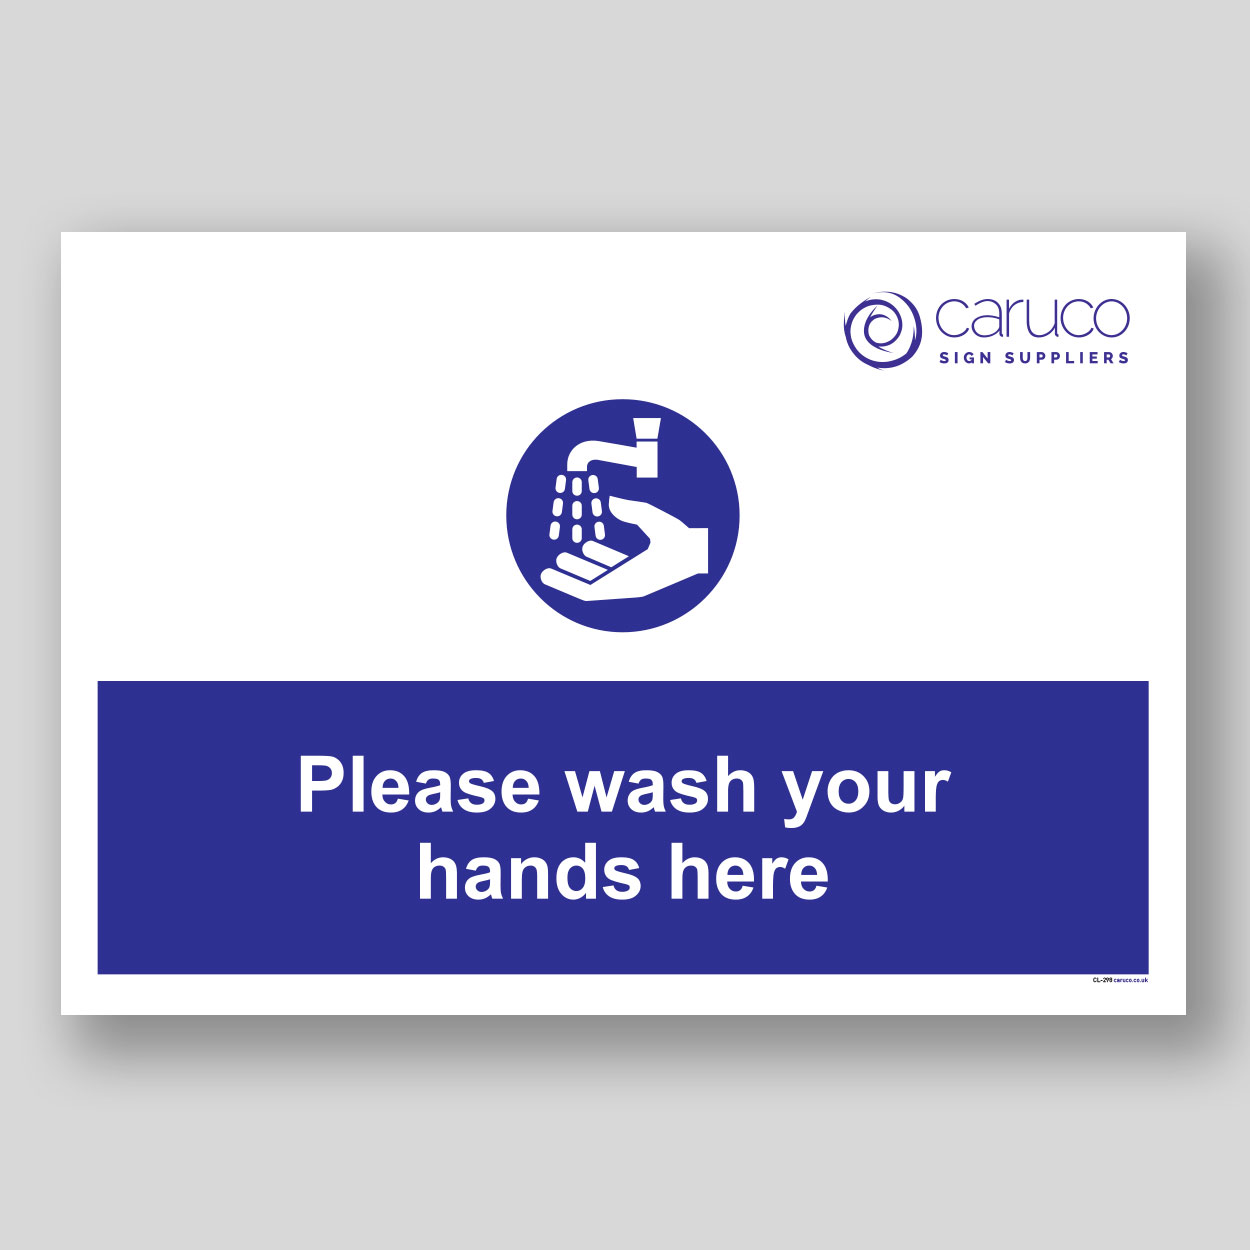 CL-298 Please wash hands here